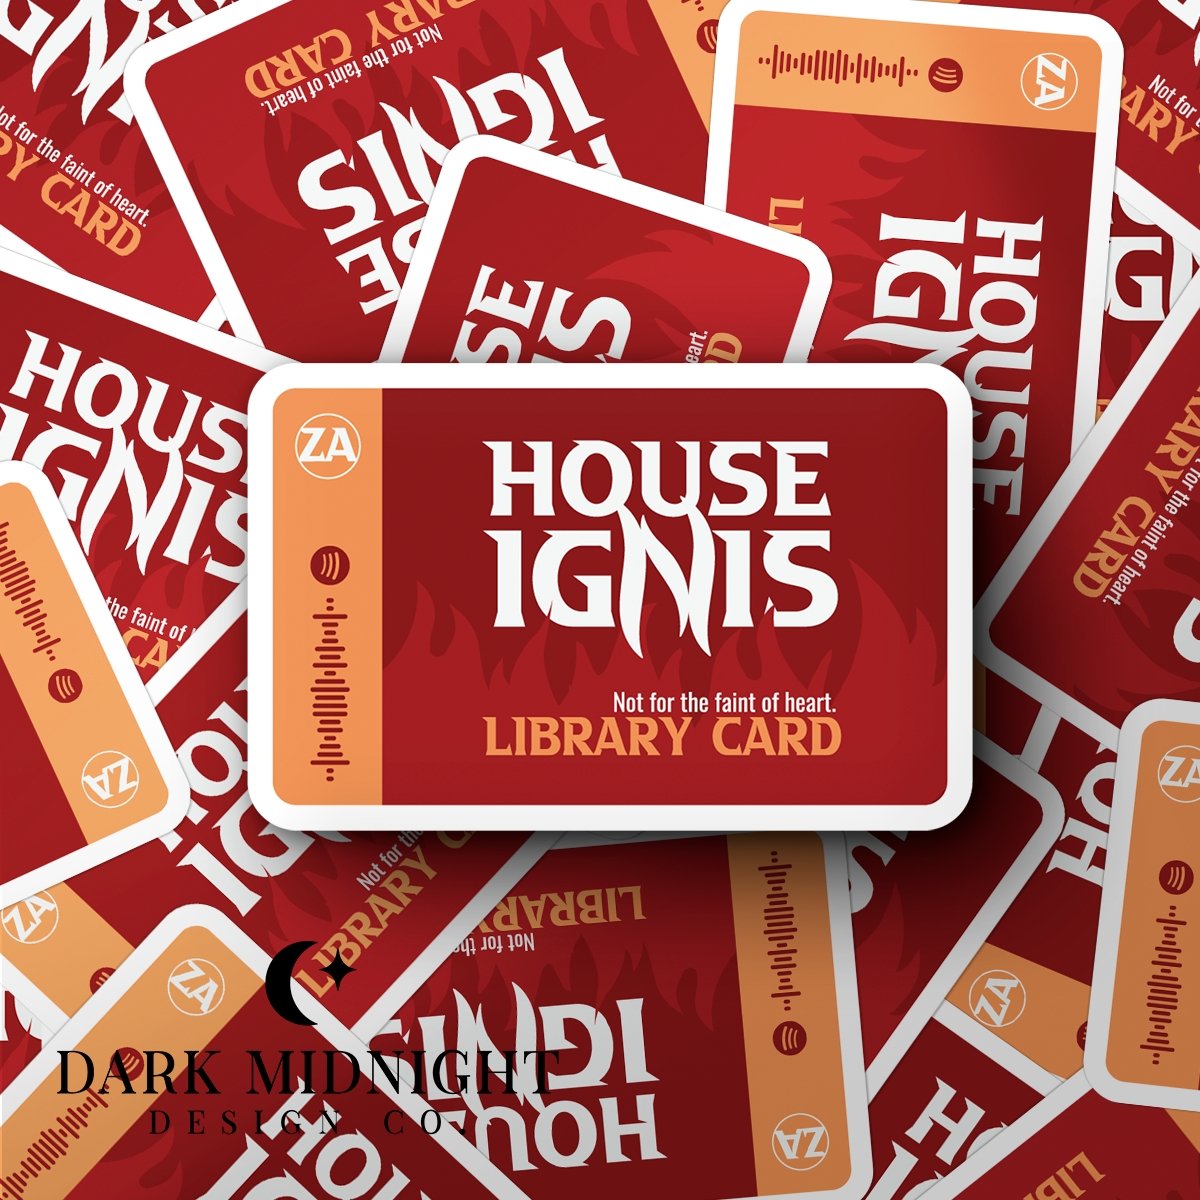 Stories of Solaria - House Ignis Library Card - Interactive Sticker - Officially Licensed Zodiac Academy Sticker - Dark Midnight Design Co